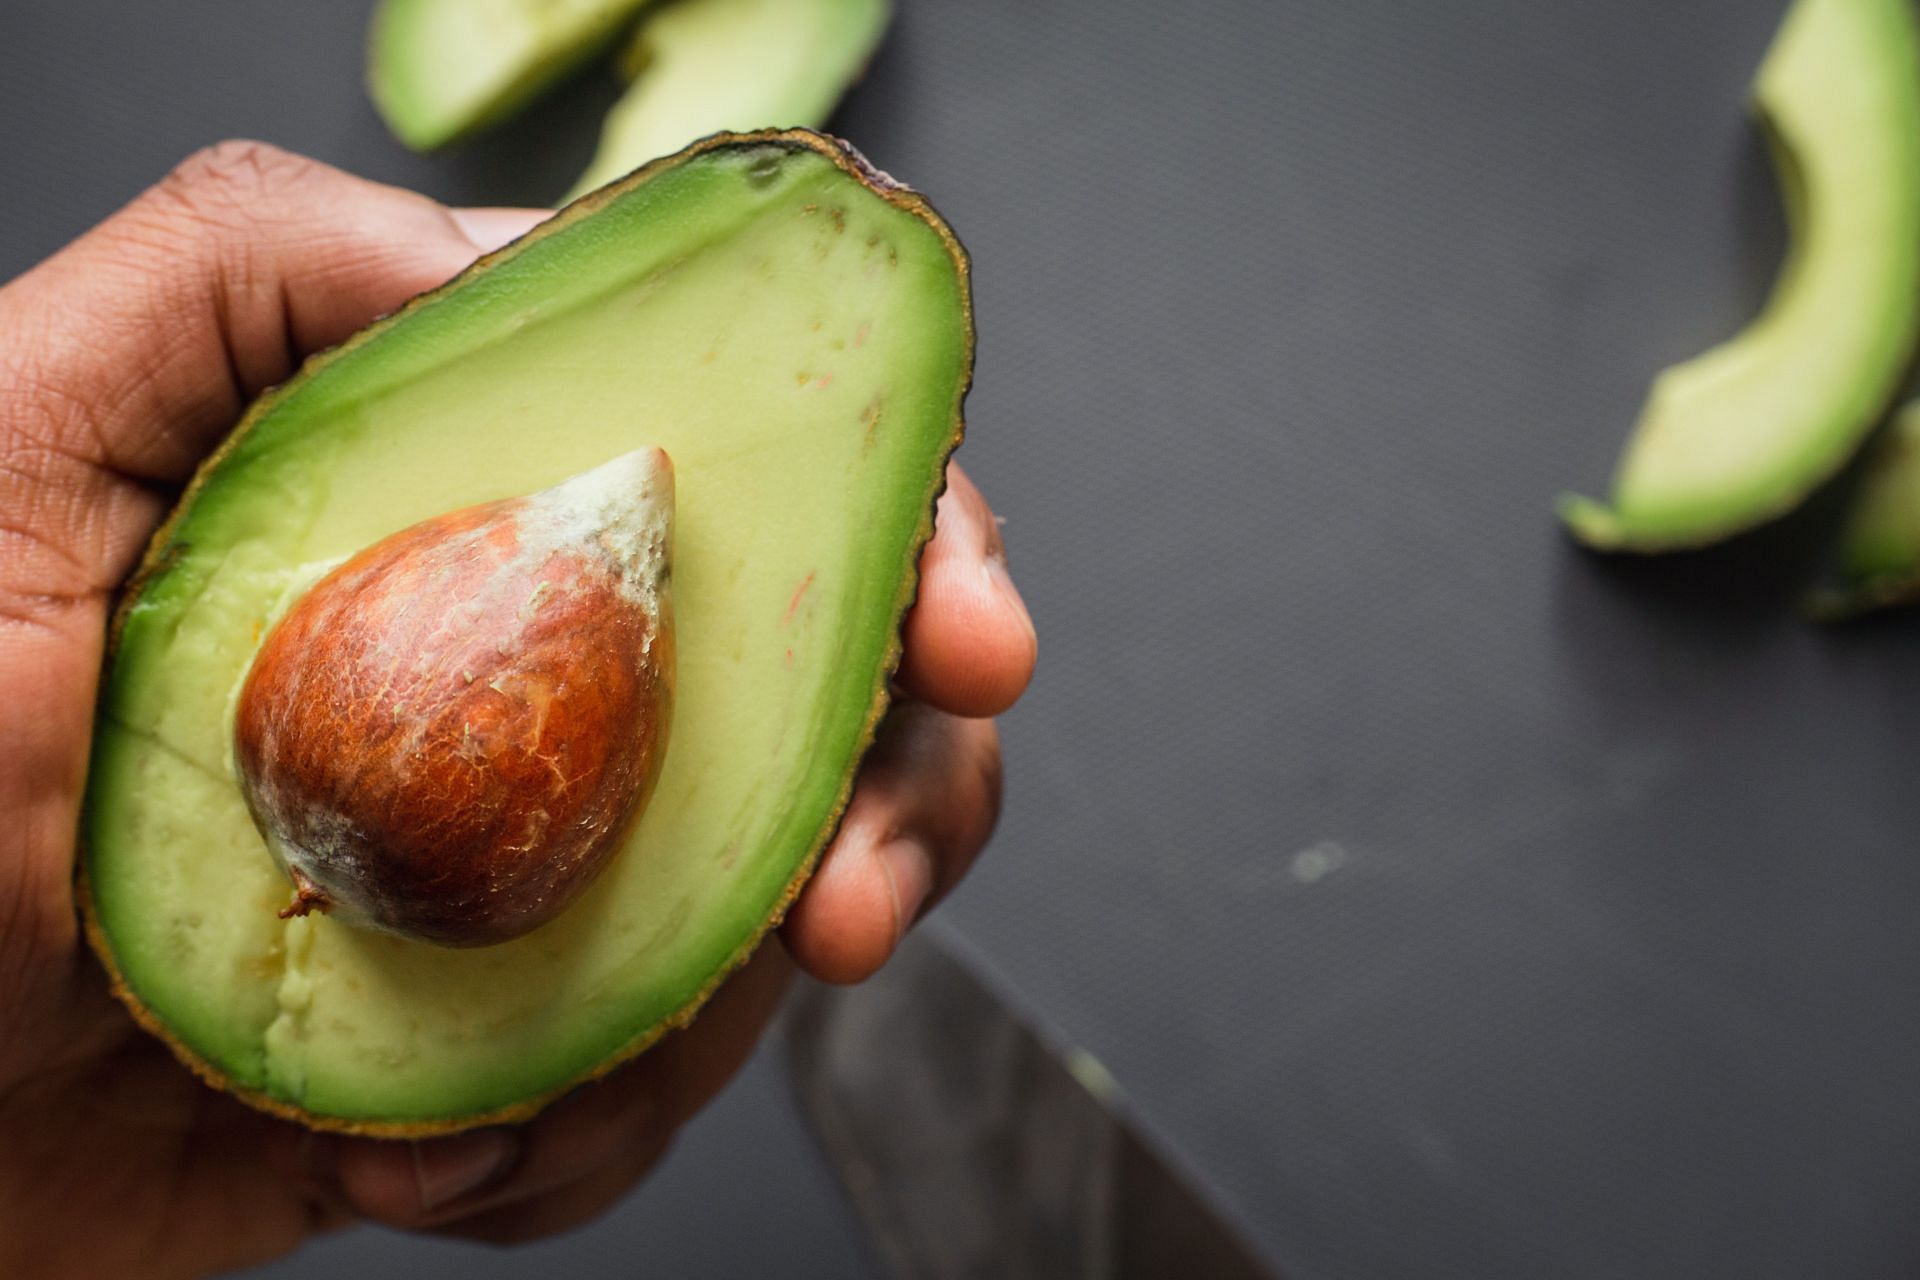 Other nutrients that avocados contain include vitamins C and E. (Image via Unsplash/Louis Hansel)